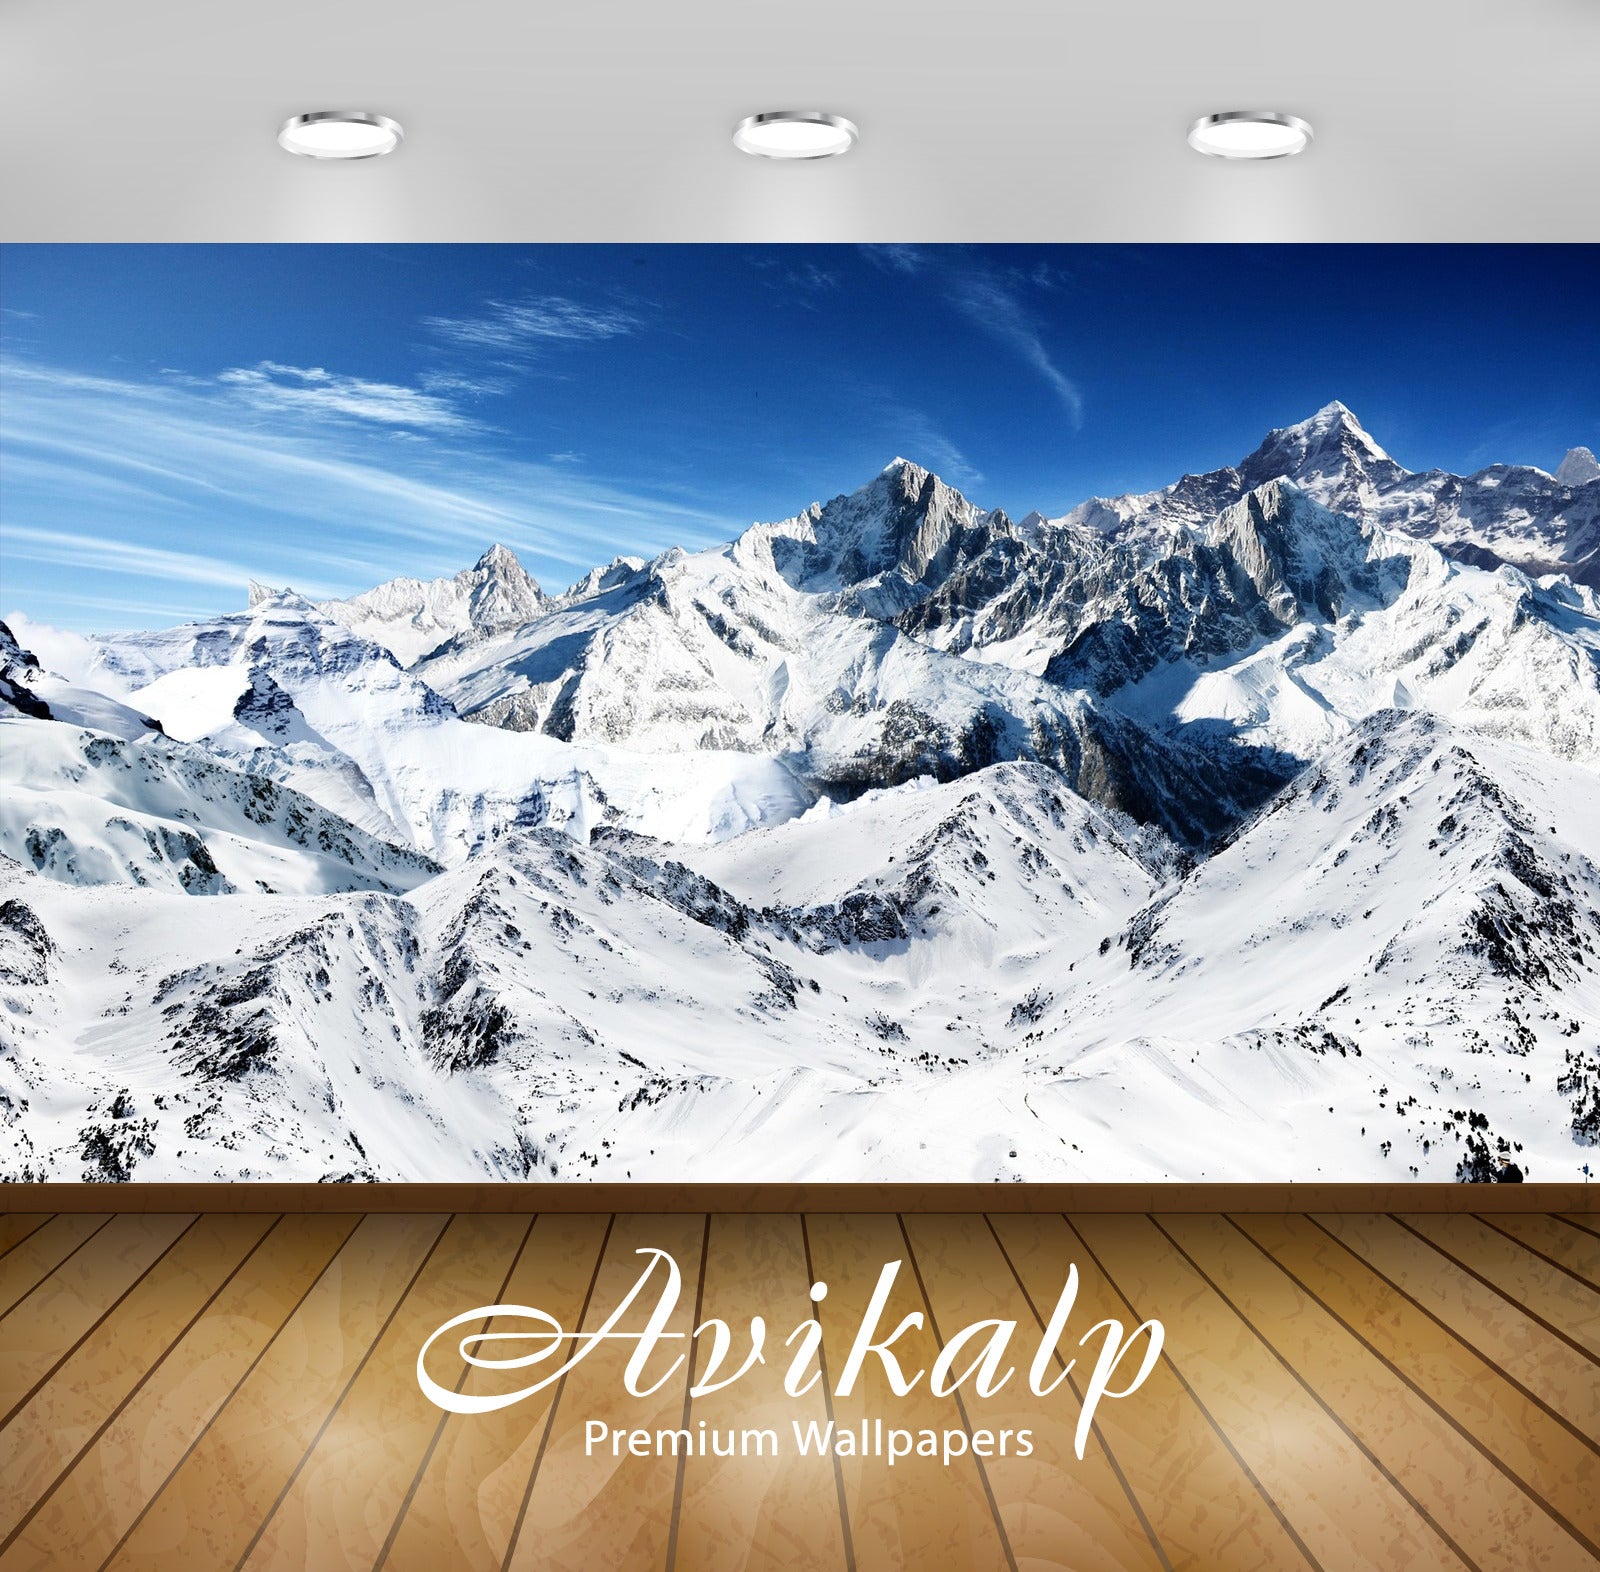 Avikalp Exclusive Awi1890 Snowy Mountains Full HD Wallpapers for Living room, Hall, Kids Room, Kitch